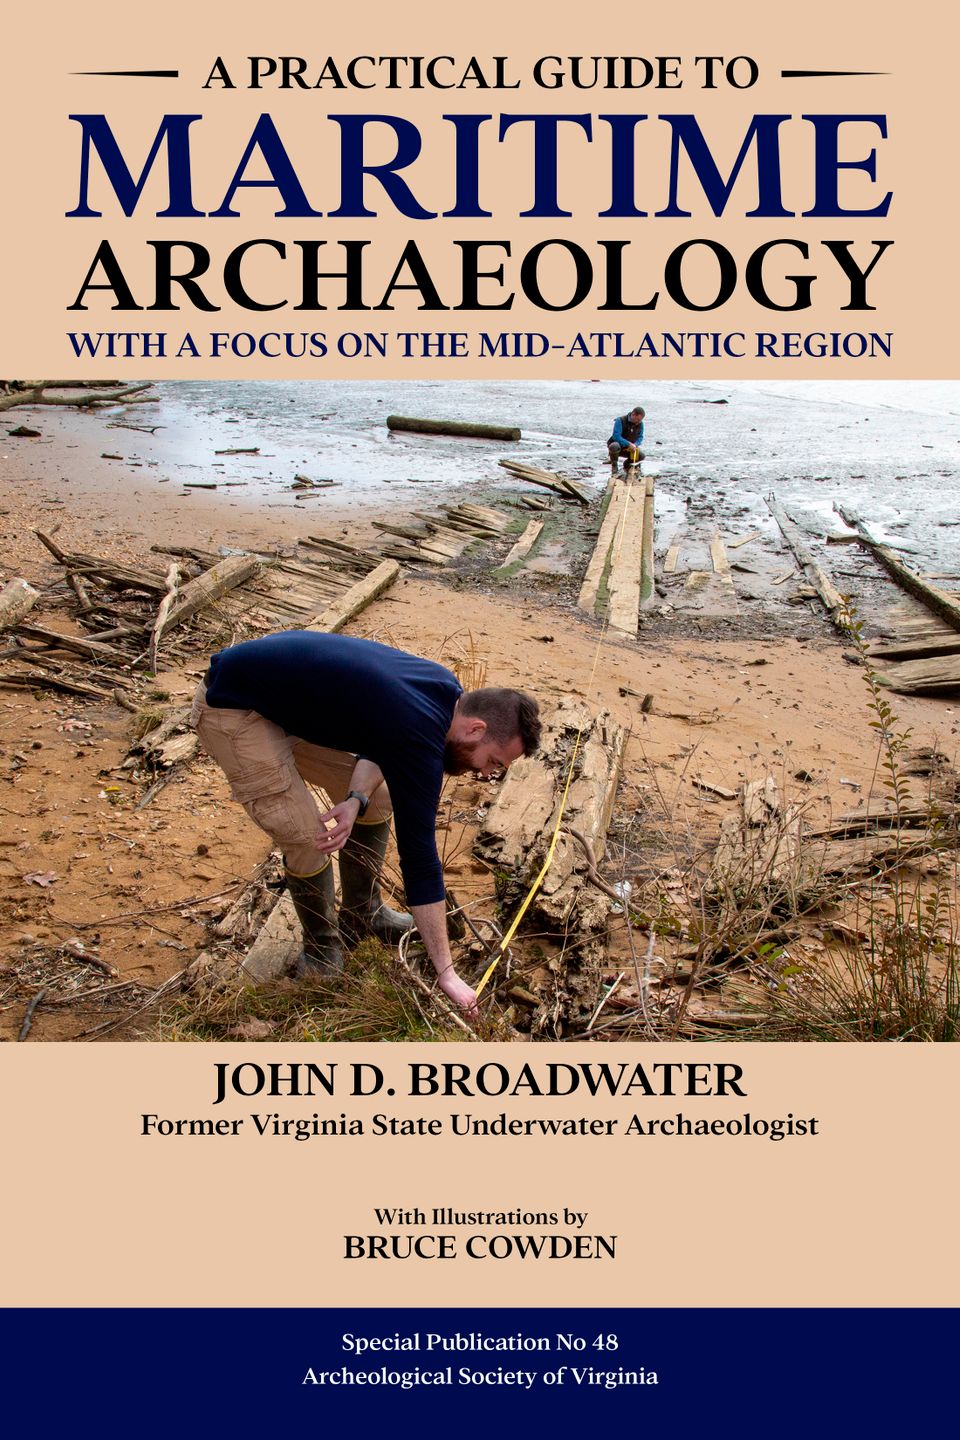 John broadwater guide front cover final